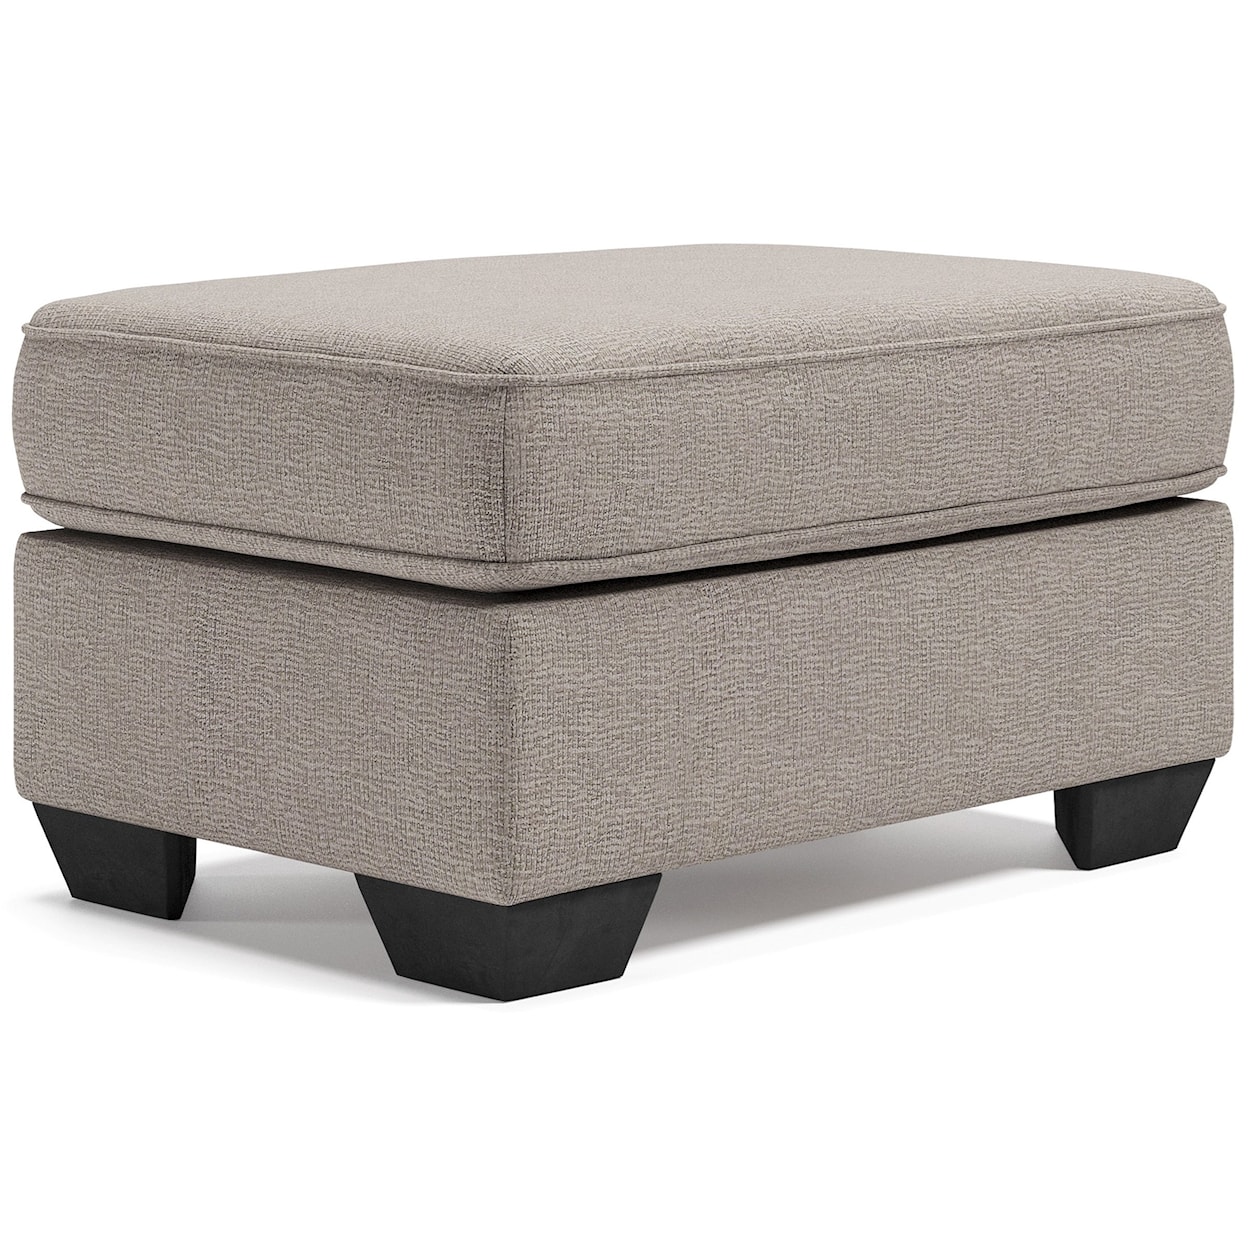 Signature Design by Ashley Greaves Ottoman